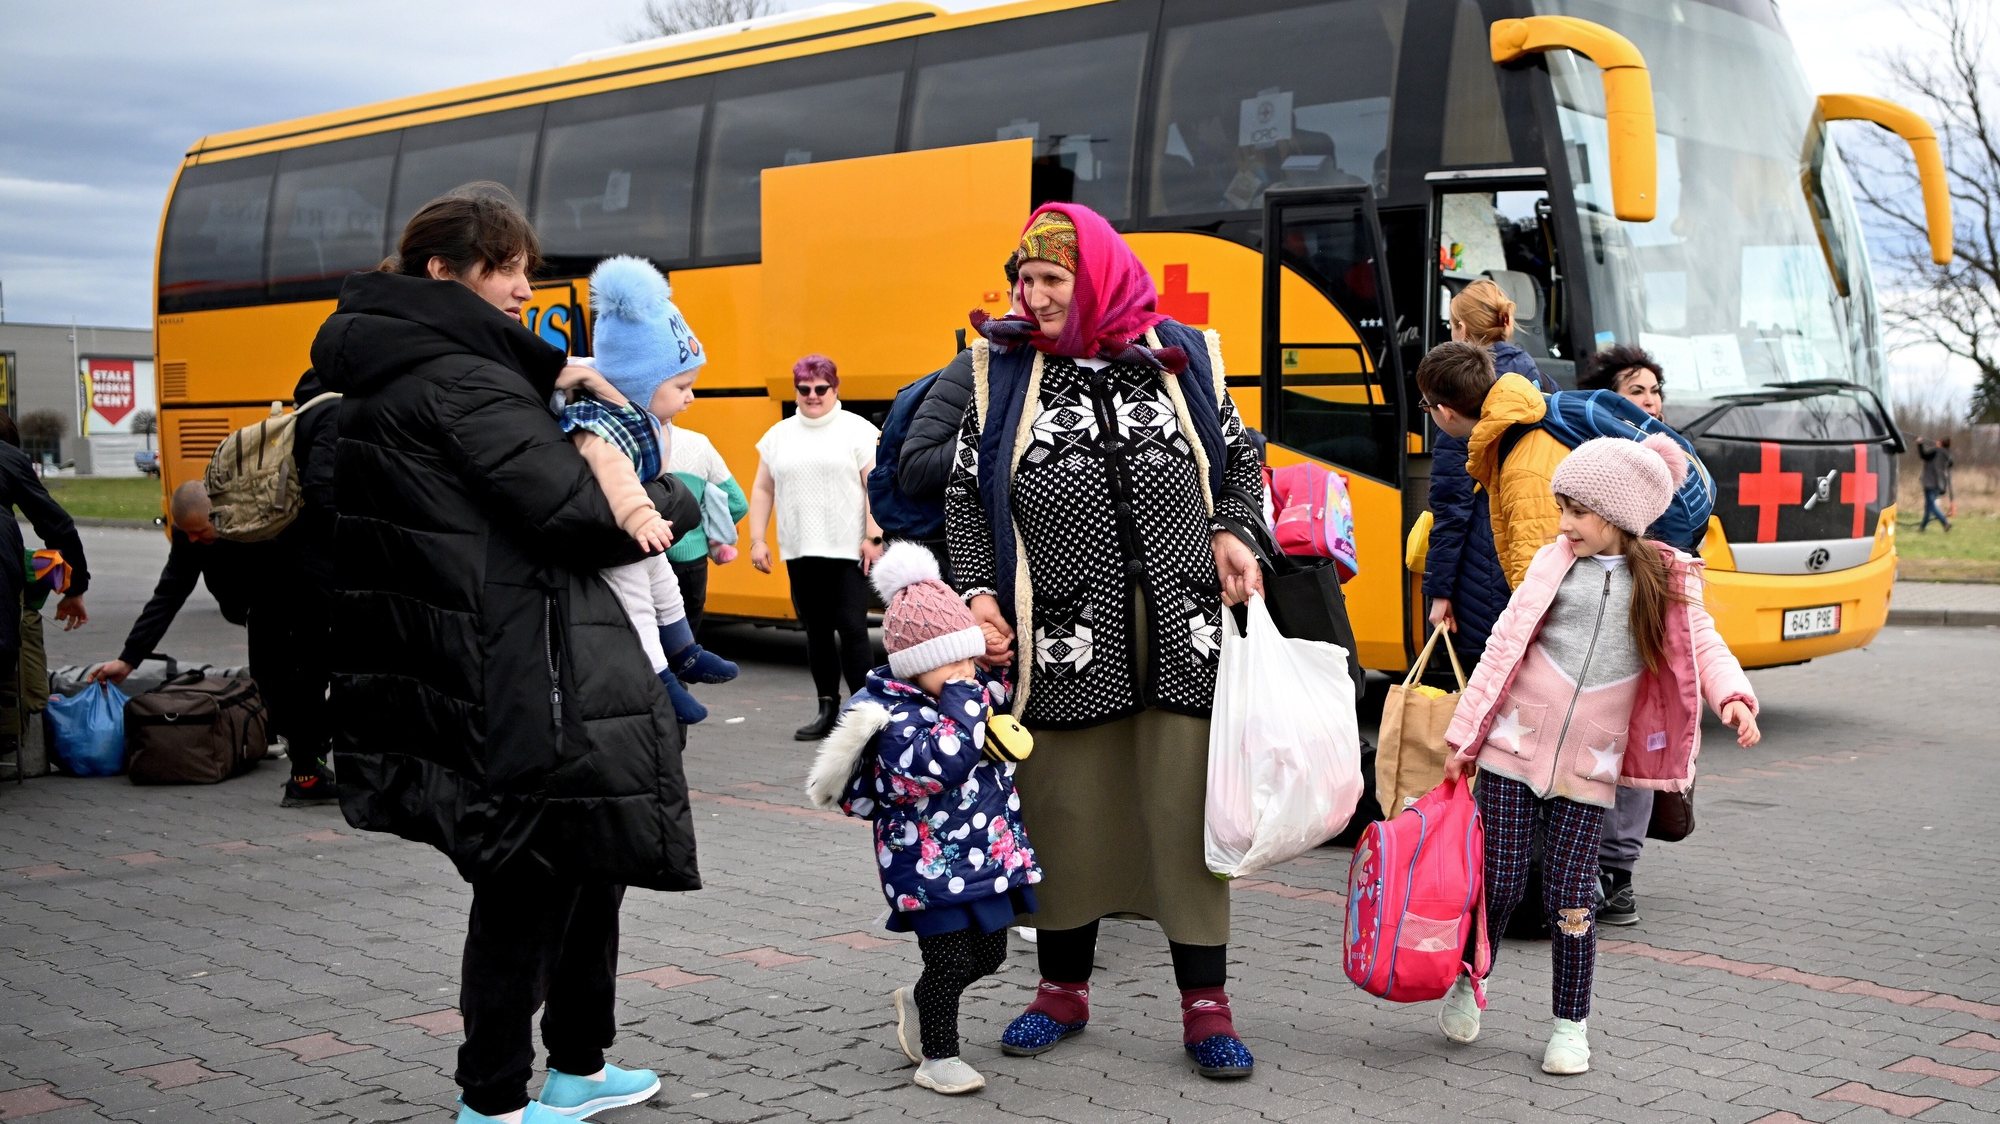 epa09880401 A war refugees from Ukraine upon arrival at the Humanitarian Aid Center in Przemysl, Poland 09 April 2022. Today marks 45 days of Russian aggression against Ukraine.  EPA/Darek Delmanowicz POLAND OUT